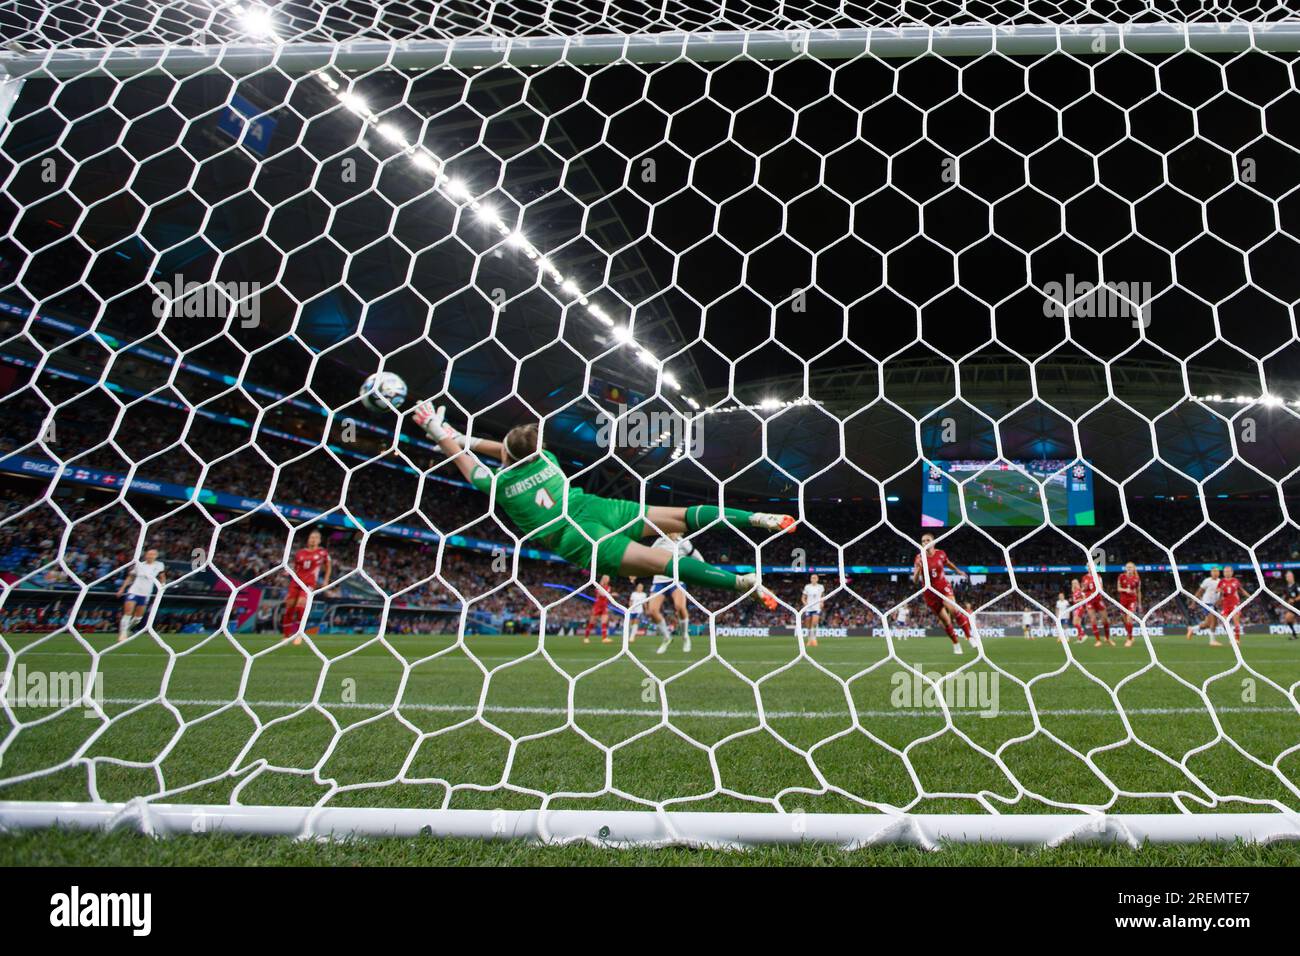 Sydney, Australia. 28th July, 2023. Goal keeper, Lene Christensen of Denmark dives to block the ball without success during the FIFA Women's World Cup 2023 Group D match between England and Denmark at Sydney Football Stadium on July 28, 2023 in Sydney, Australia Credit: IOIO IMAGES/Alamy Live News Stock Photo